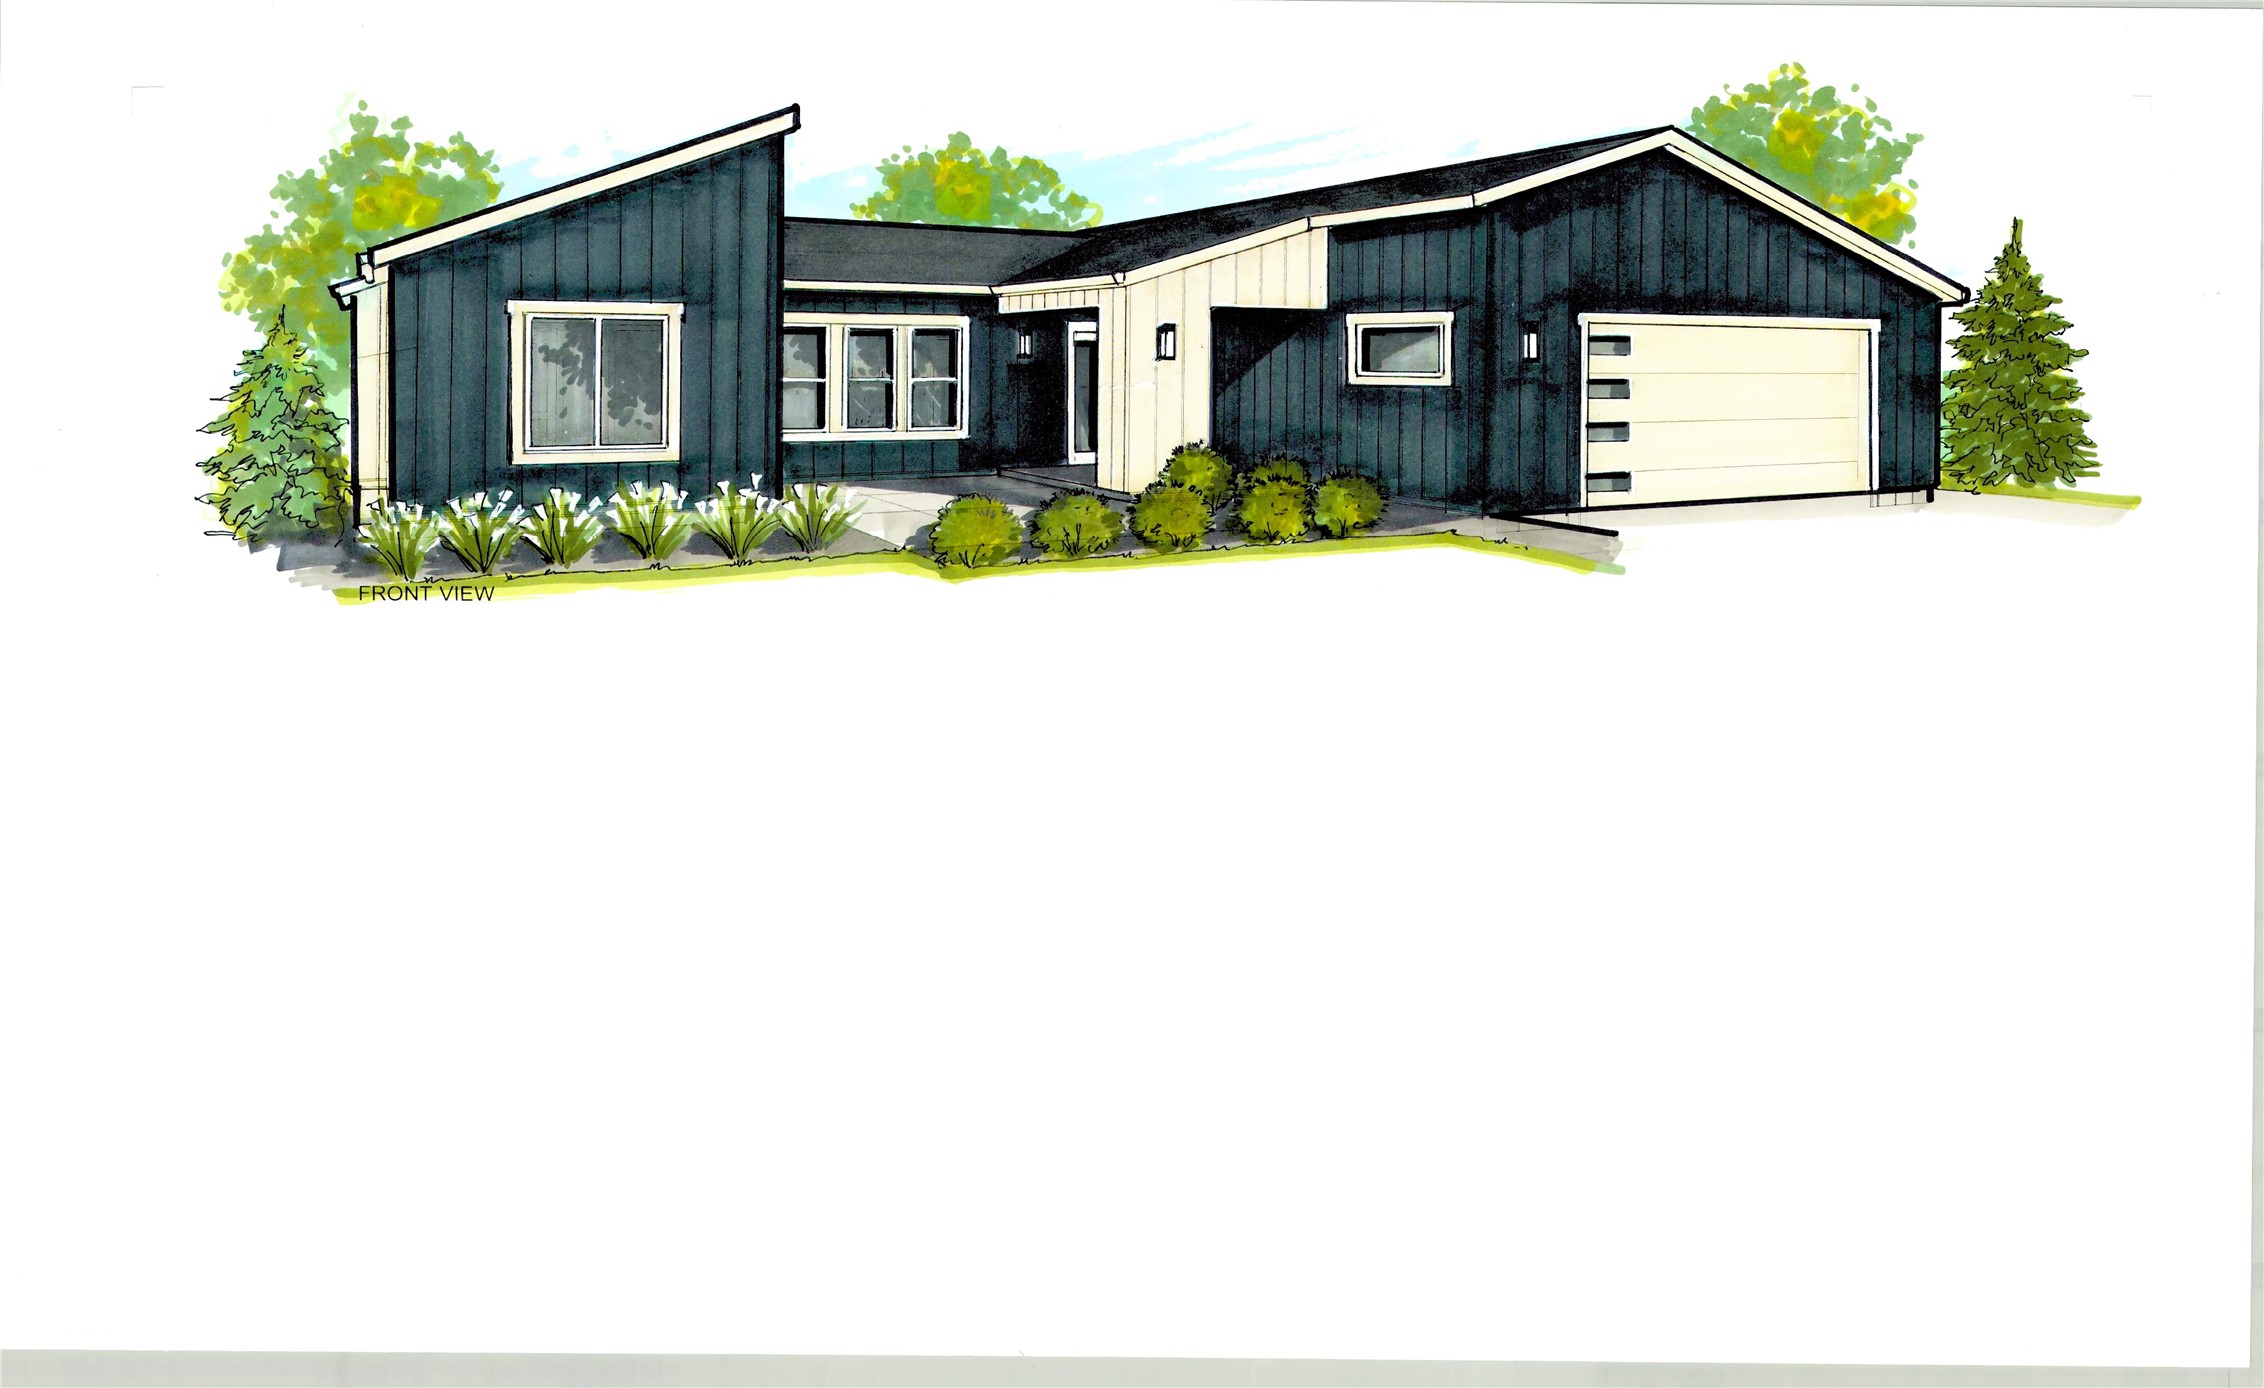 To be built mountain modern home in The Preserve Subdivision. Easy access to the bypass and only minutes from FVCC, Logan Health, and Kalispell's major shopping areas. This Dorado floor plan has 3,692 SF with 3 beds, 2 baths, unfinished walkout basement, and attached two car garage. Open floor plan with lots of natural light. House has large kitchen island, vaulted ceilings, AC, covered porch, & underground sprinklers. Subdivision offers walking trails, dog park, and play ground all within close distance to the home. Contact Cecil Waatti 406.890.4000 Layne Massie 406.270.6664 or your real estate professional.